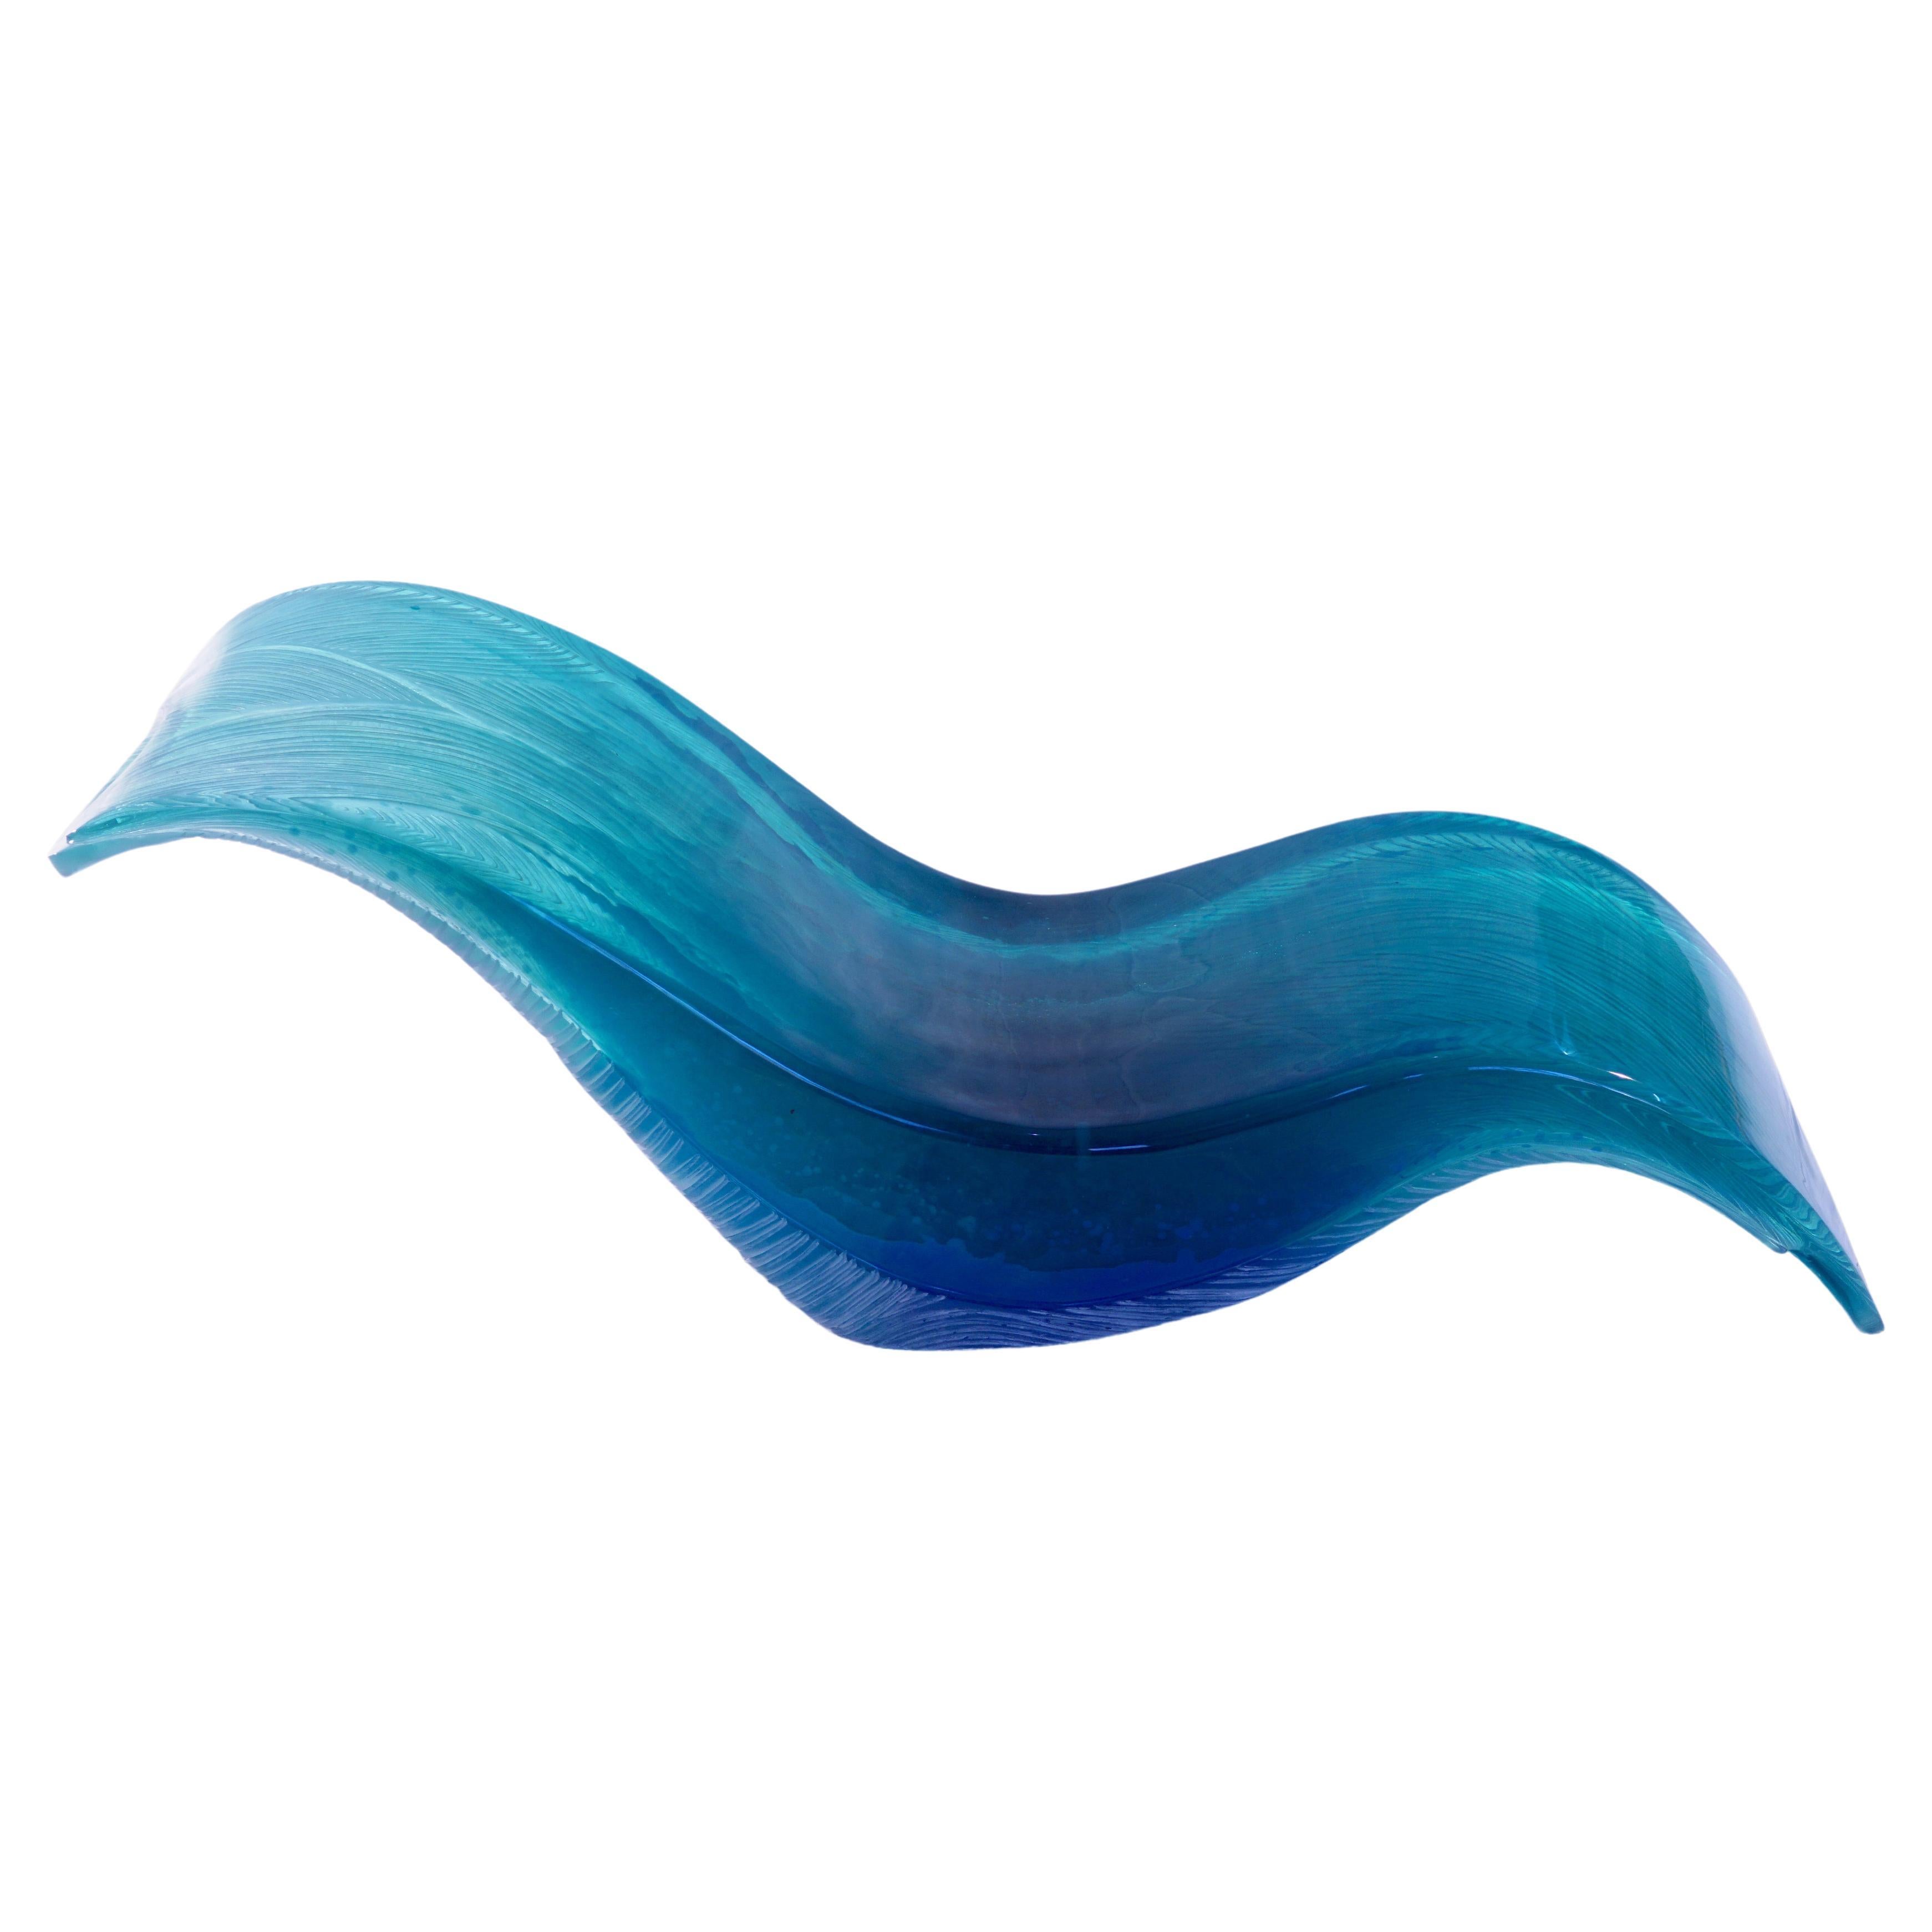 Wave Lounge by Eduard Locota. Turquoise-Blue Acrylic Glass Sculptural Design